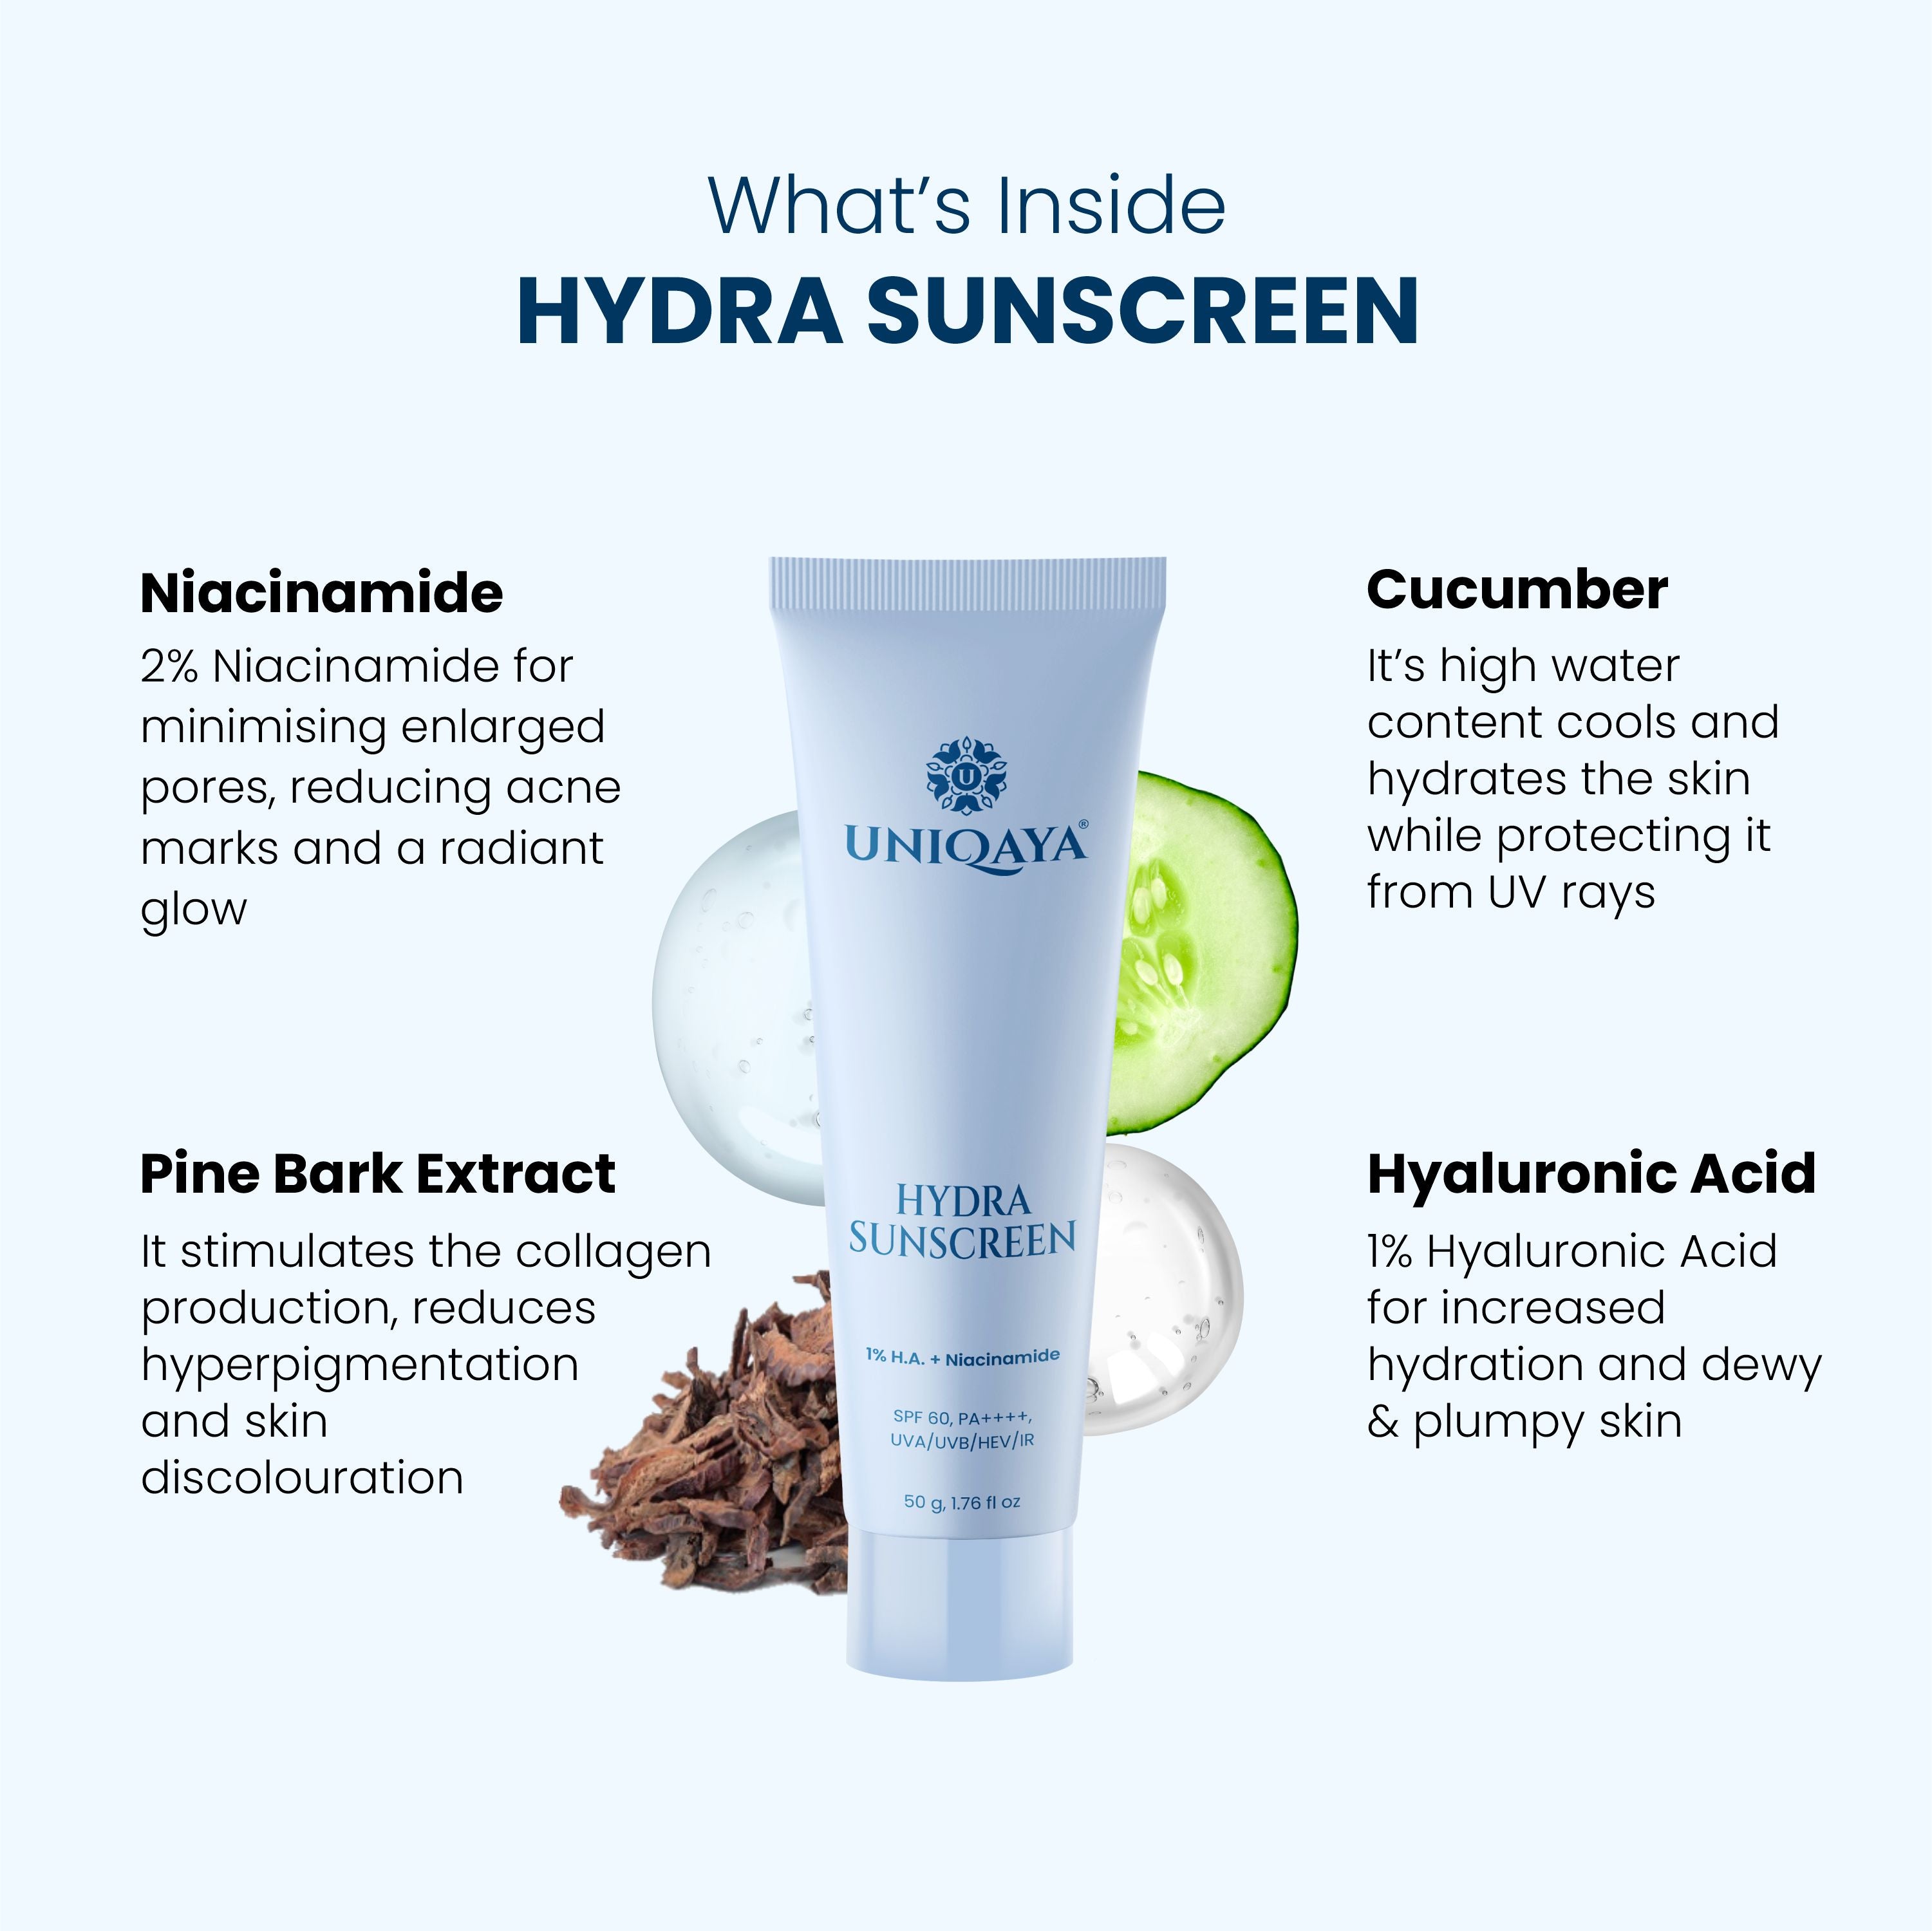 Hydra Sunscreen What's Inside?